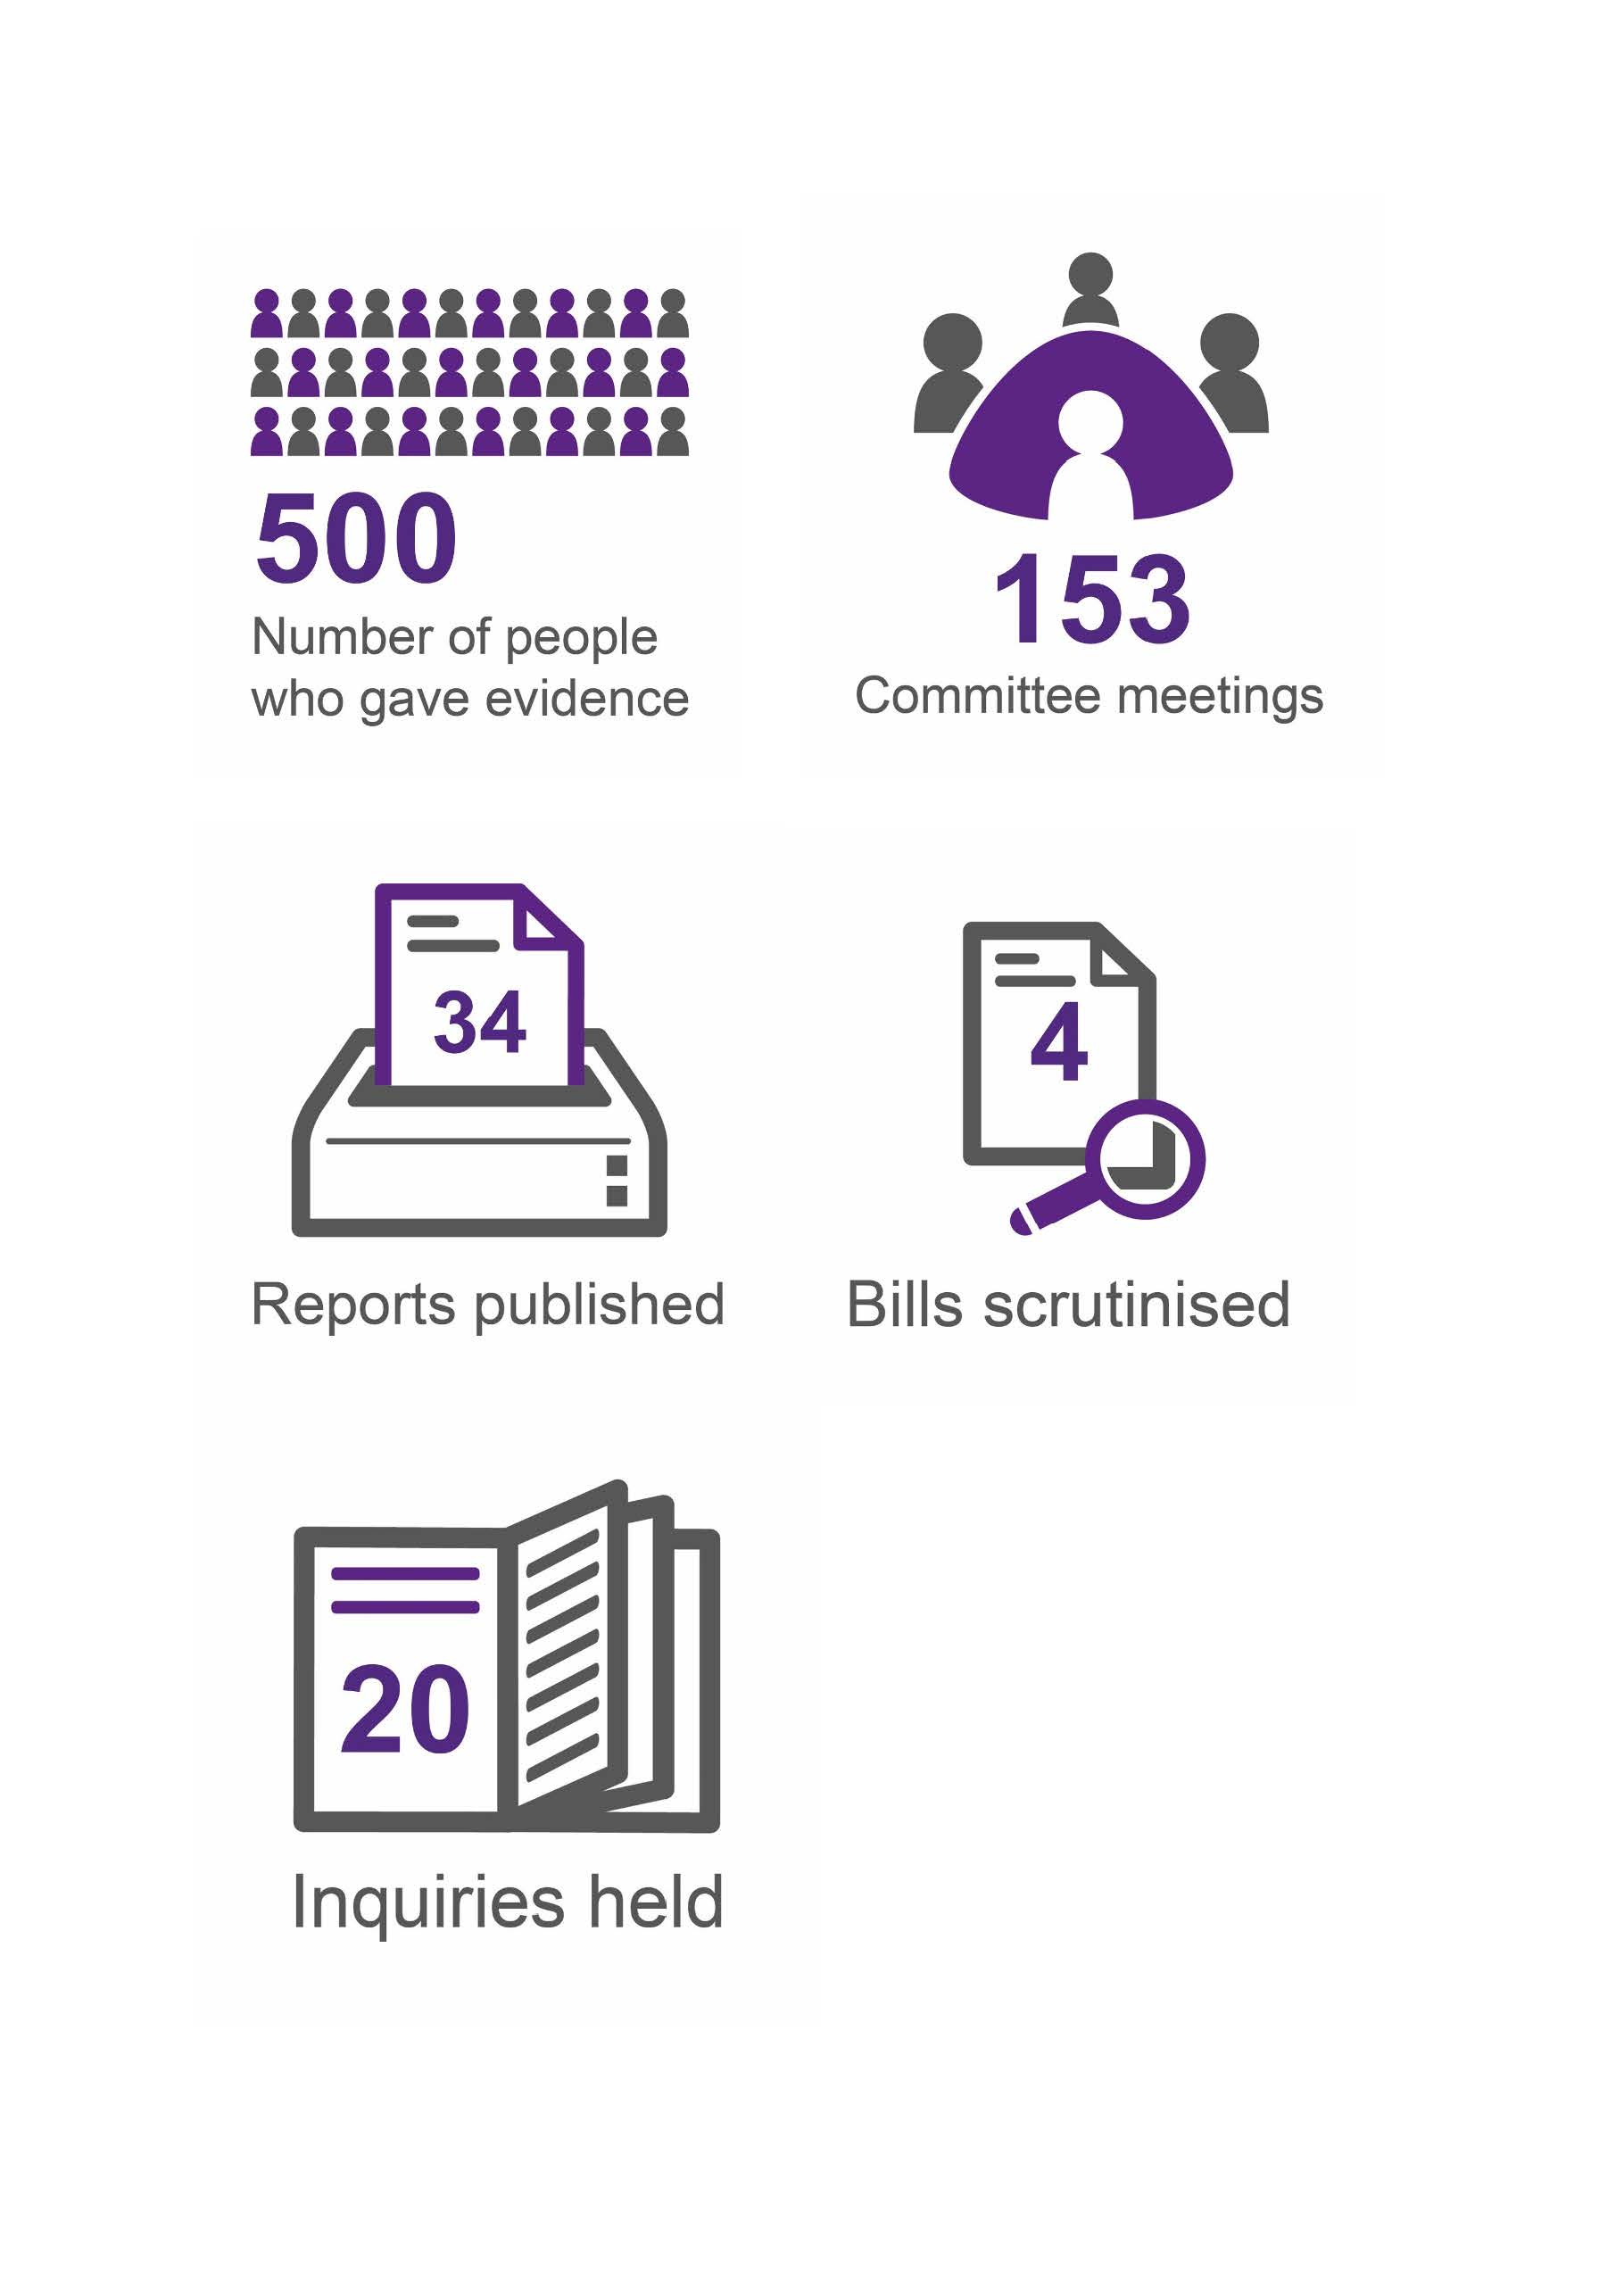 Image shows a number of infographics setting out key statistics for the Education and Skills Committee. This includes the fact that it held 153 committee meetings and heard evidence from 500 people this Parliamentary session. The Committee published 34 reports, scrutinised 4 Bills and held 20 Inquiries.